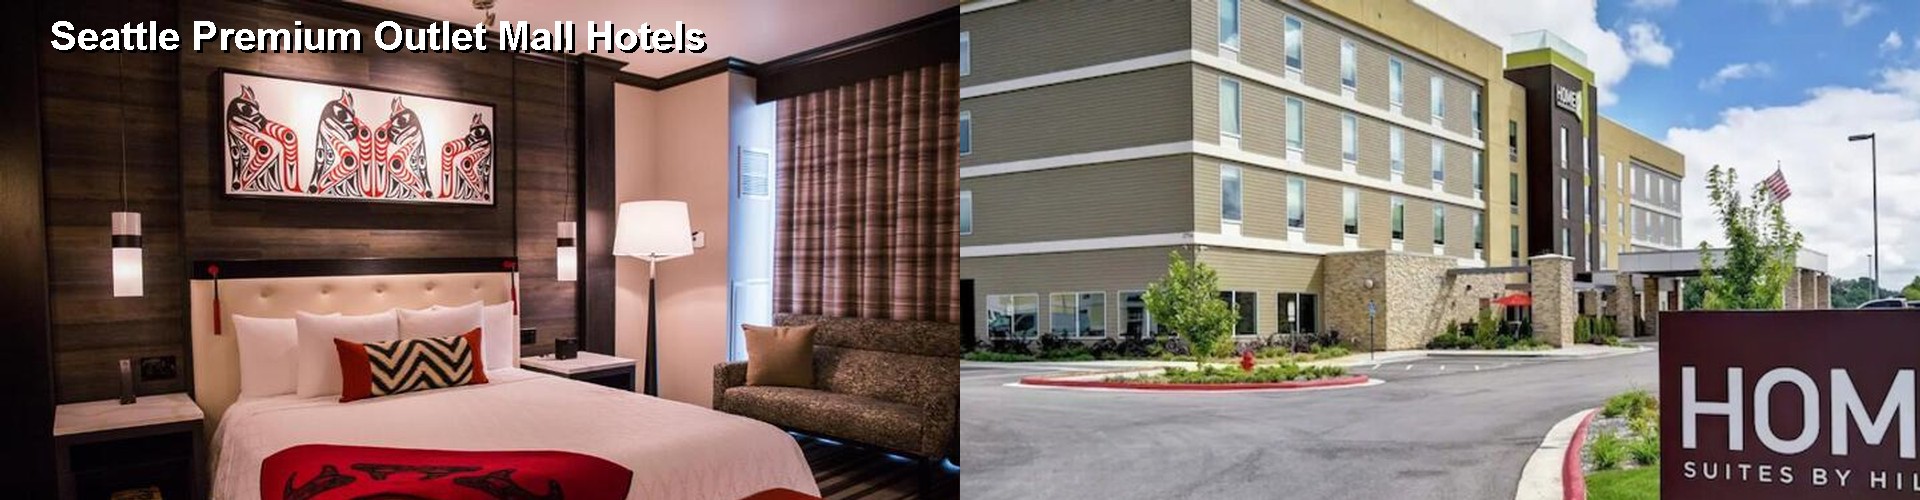 4 Best Hotels near Seattle Premium Outlet Mall